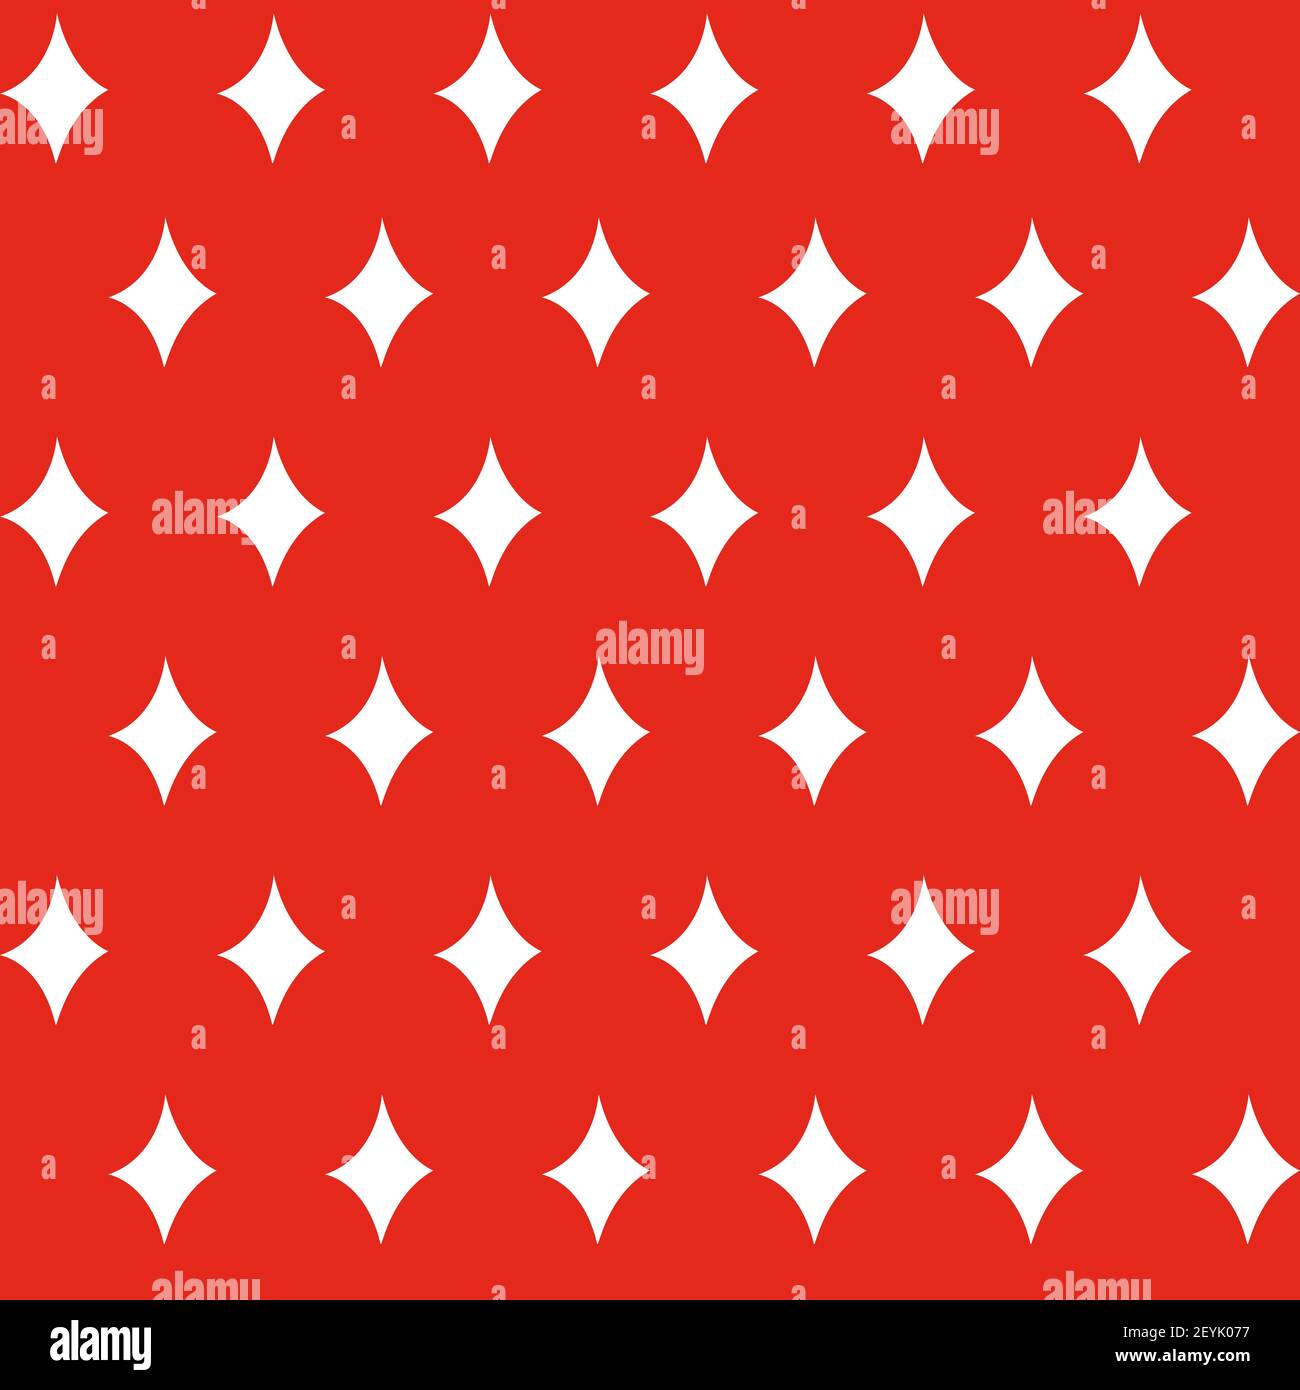 Diamond stars seamless christmas pattern - white figures on the red background. Vector illustration made in the traditional style of hand drawing Stock Vector